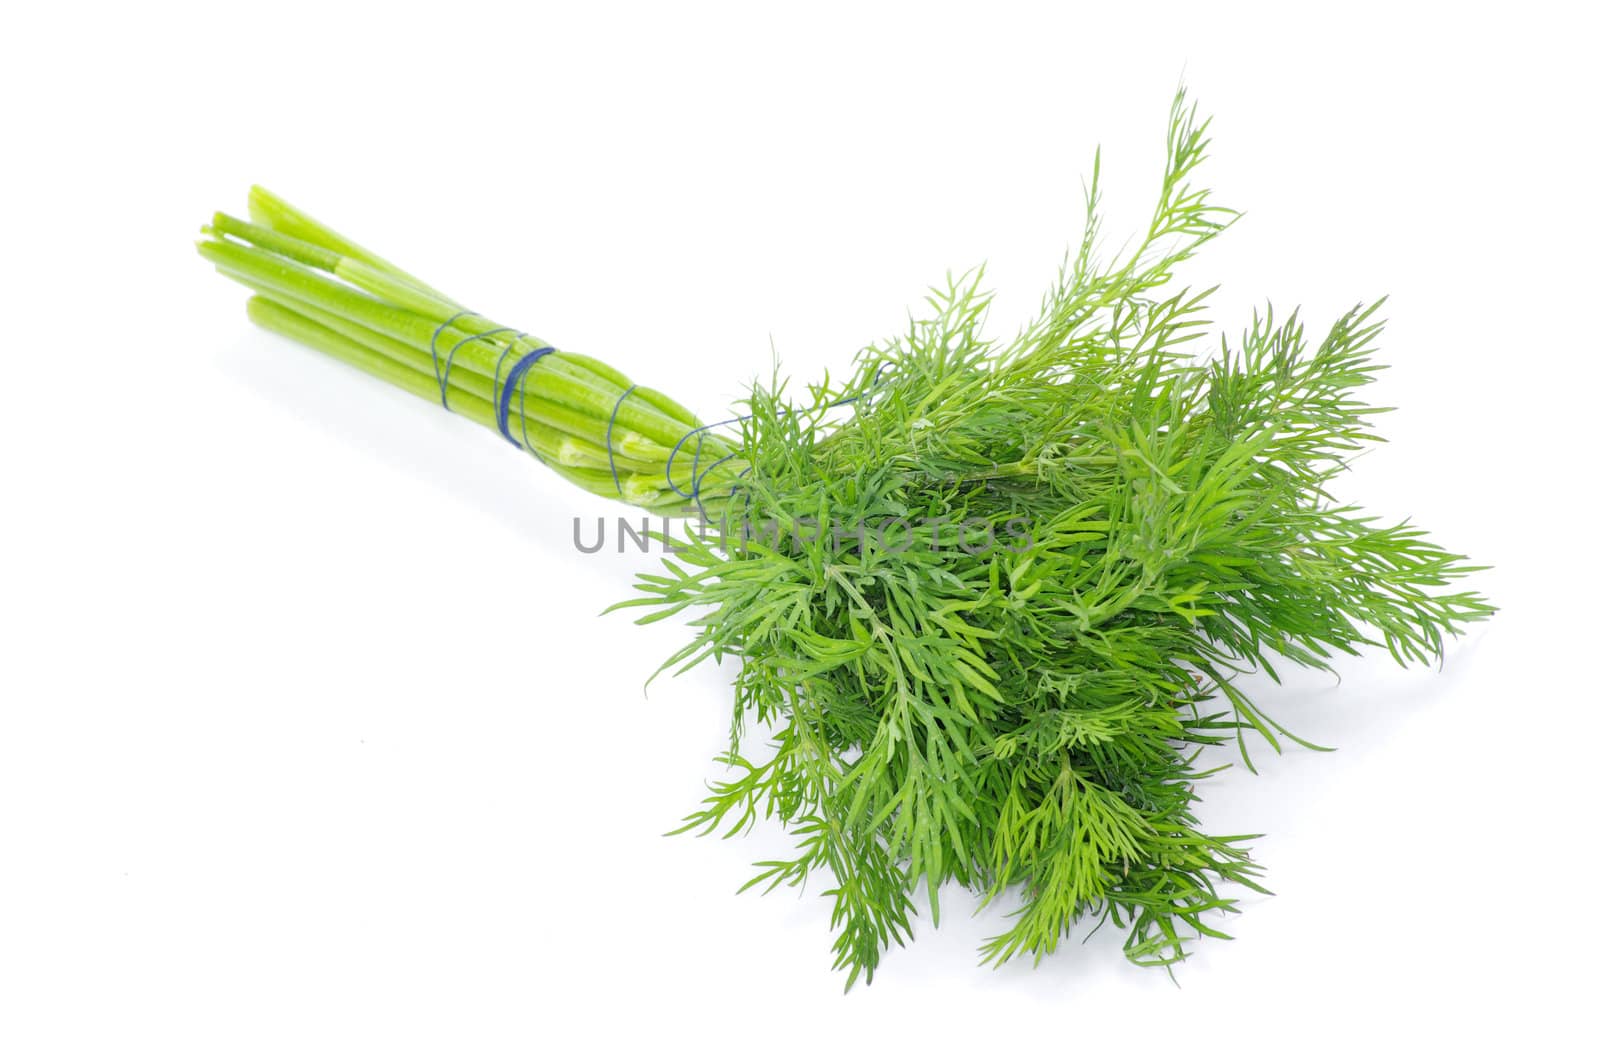 dill on a white background